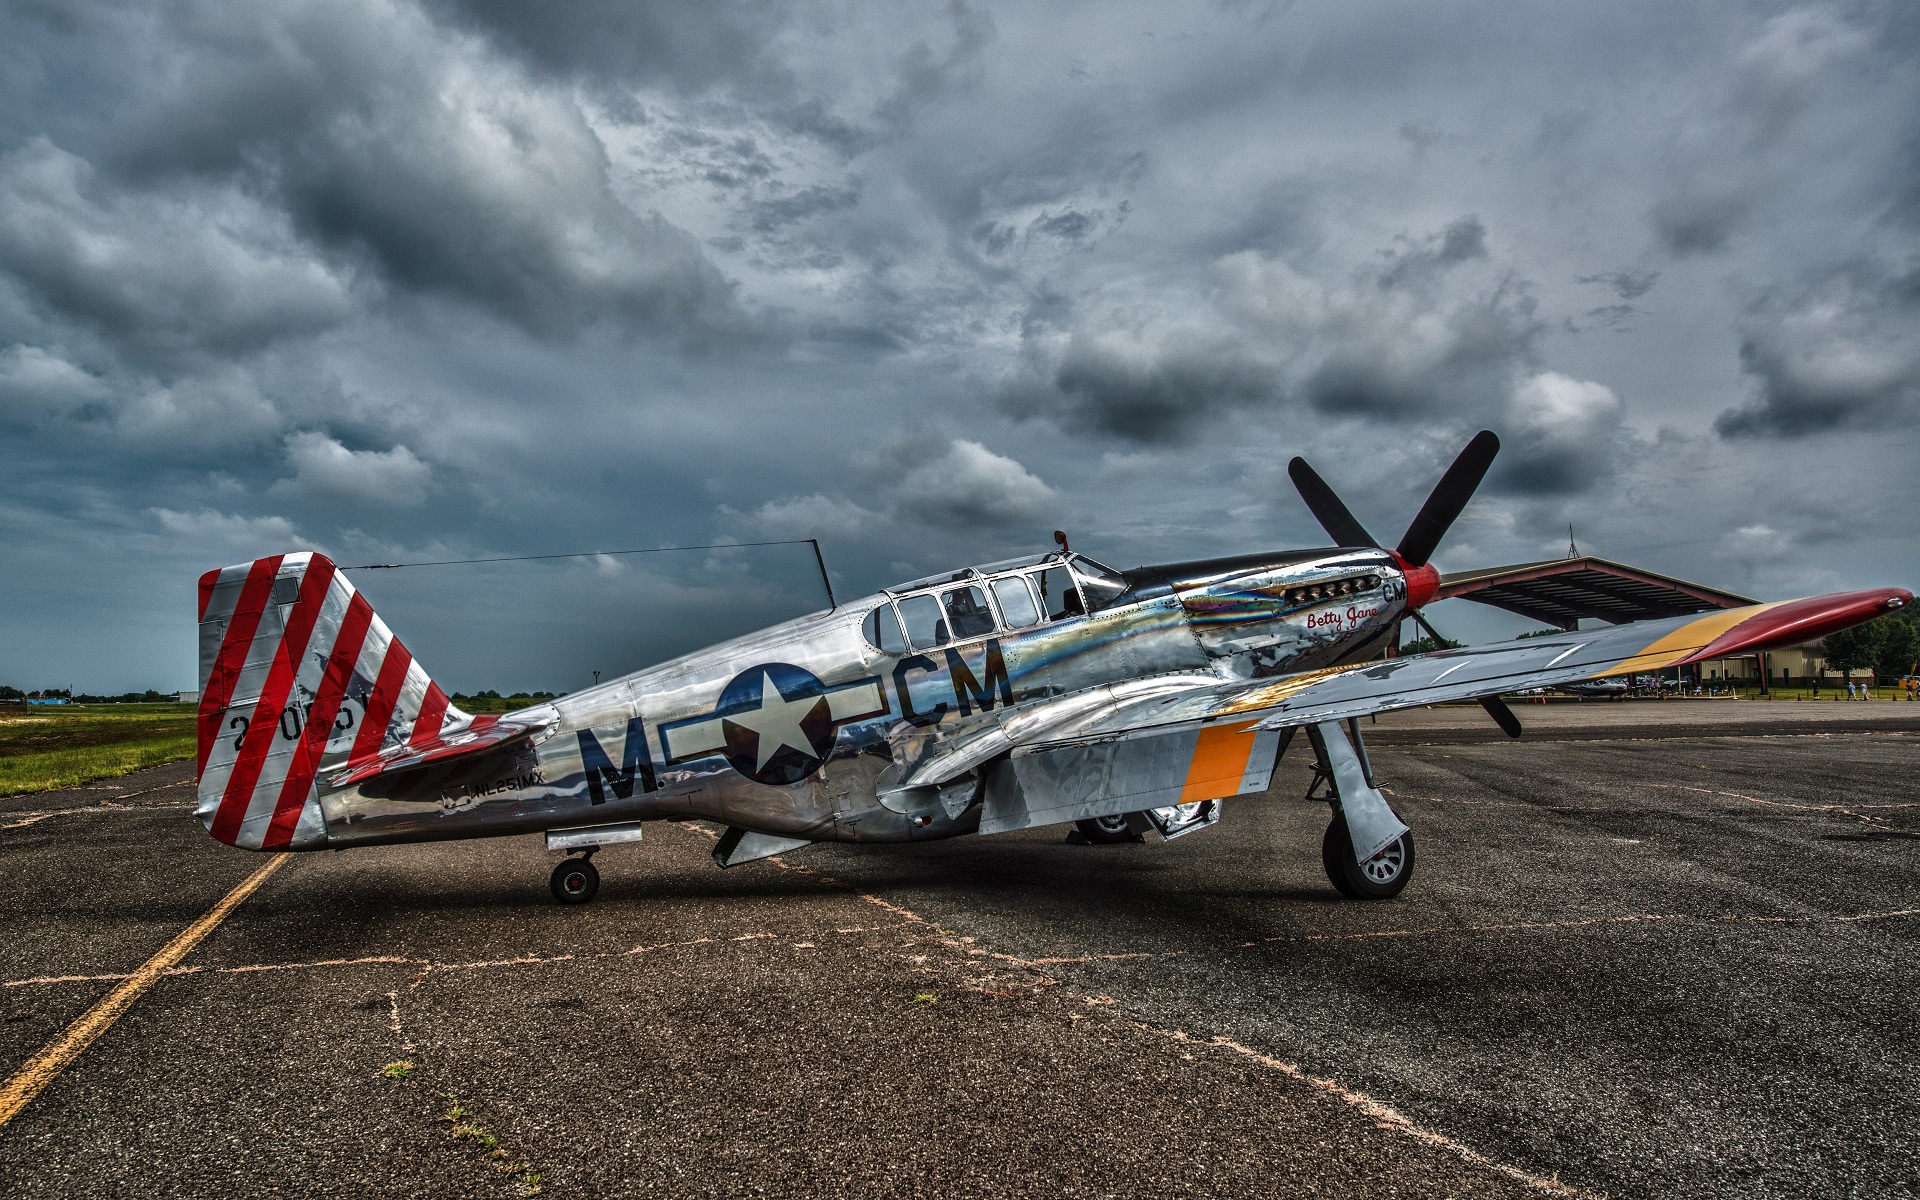 General 1920x1200 North American P-51 Mustang overcast World War II military vehicle vehicle military propeller American aircraft aircraft military aircraft clouds